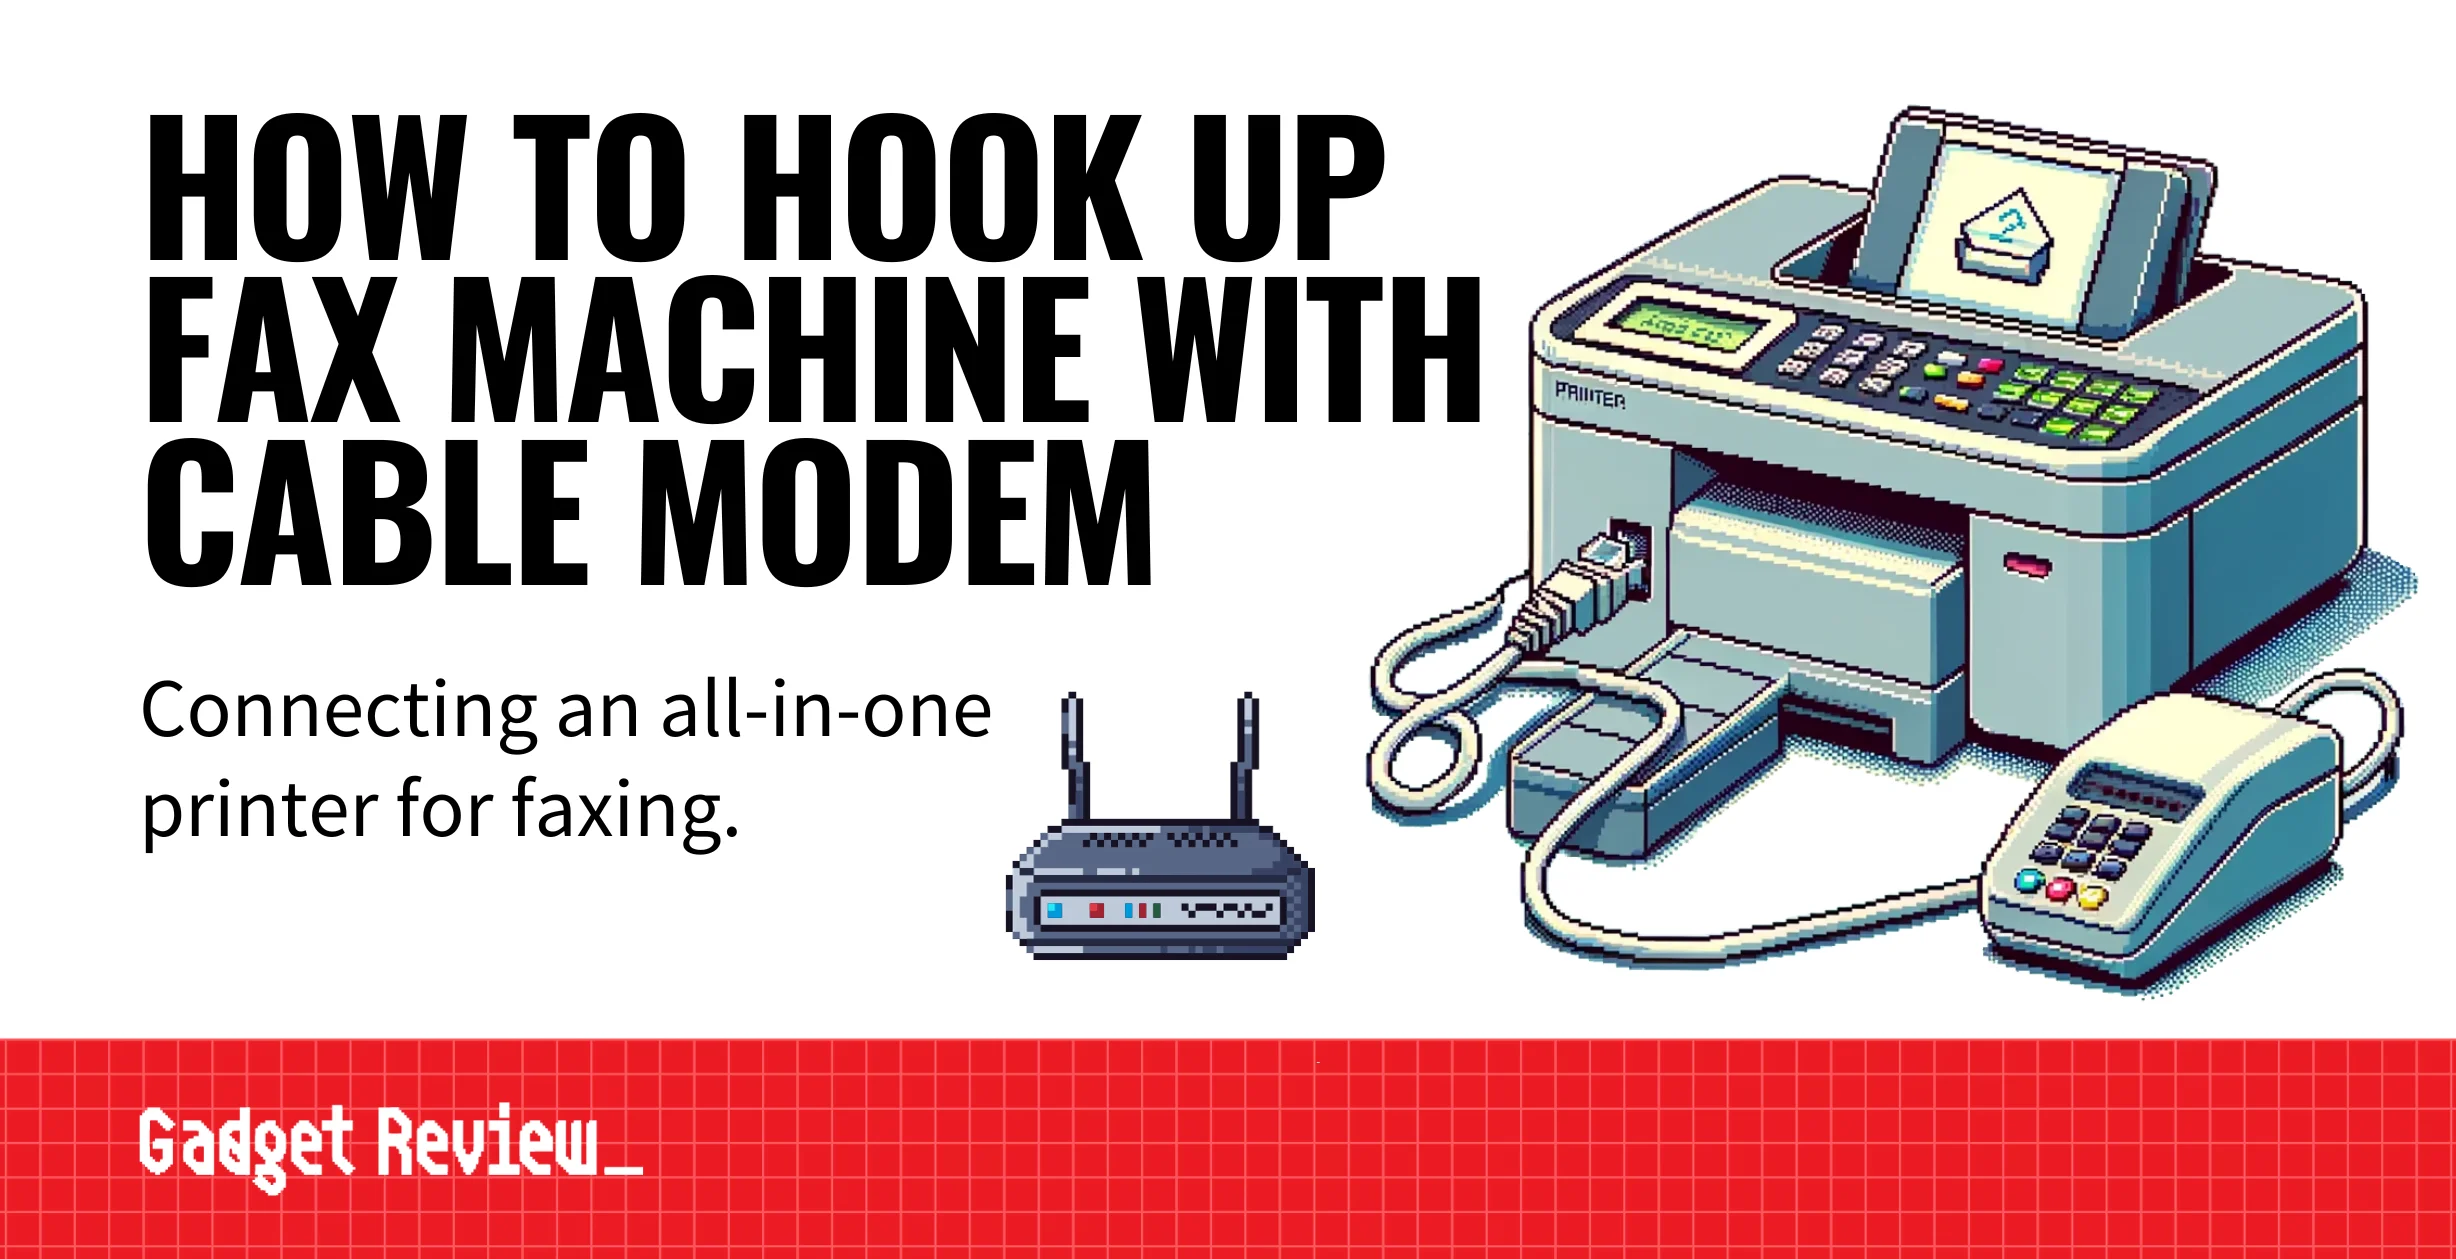 How to Hook Up Fax Machine With Cable Modem